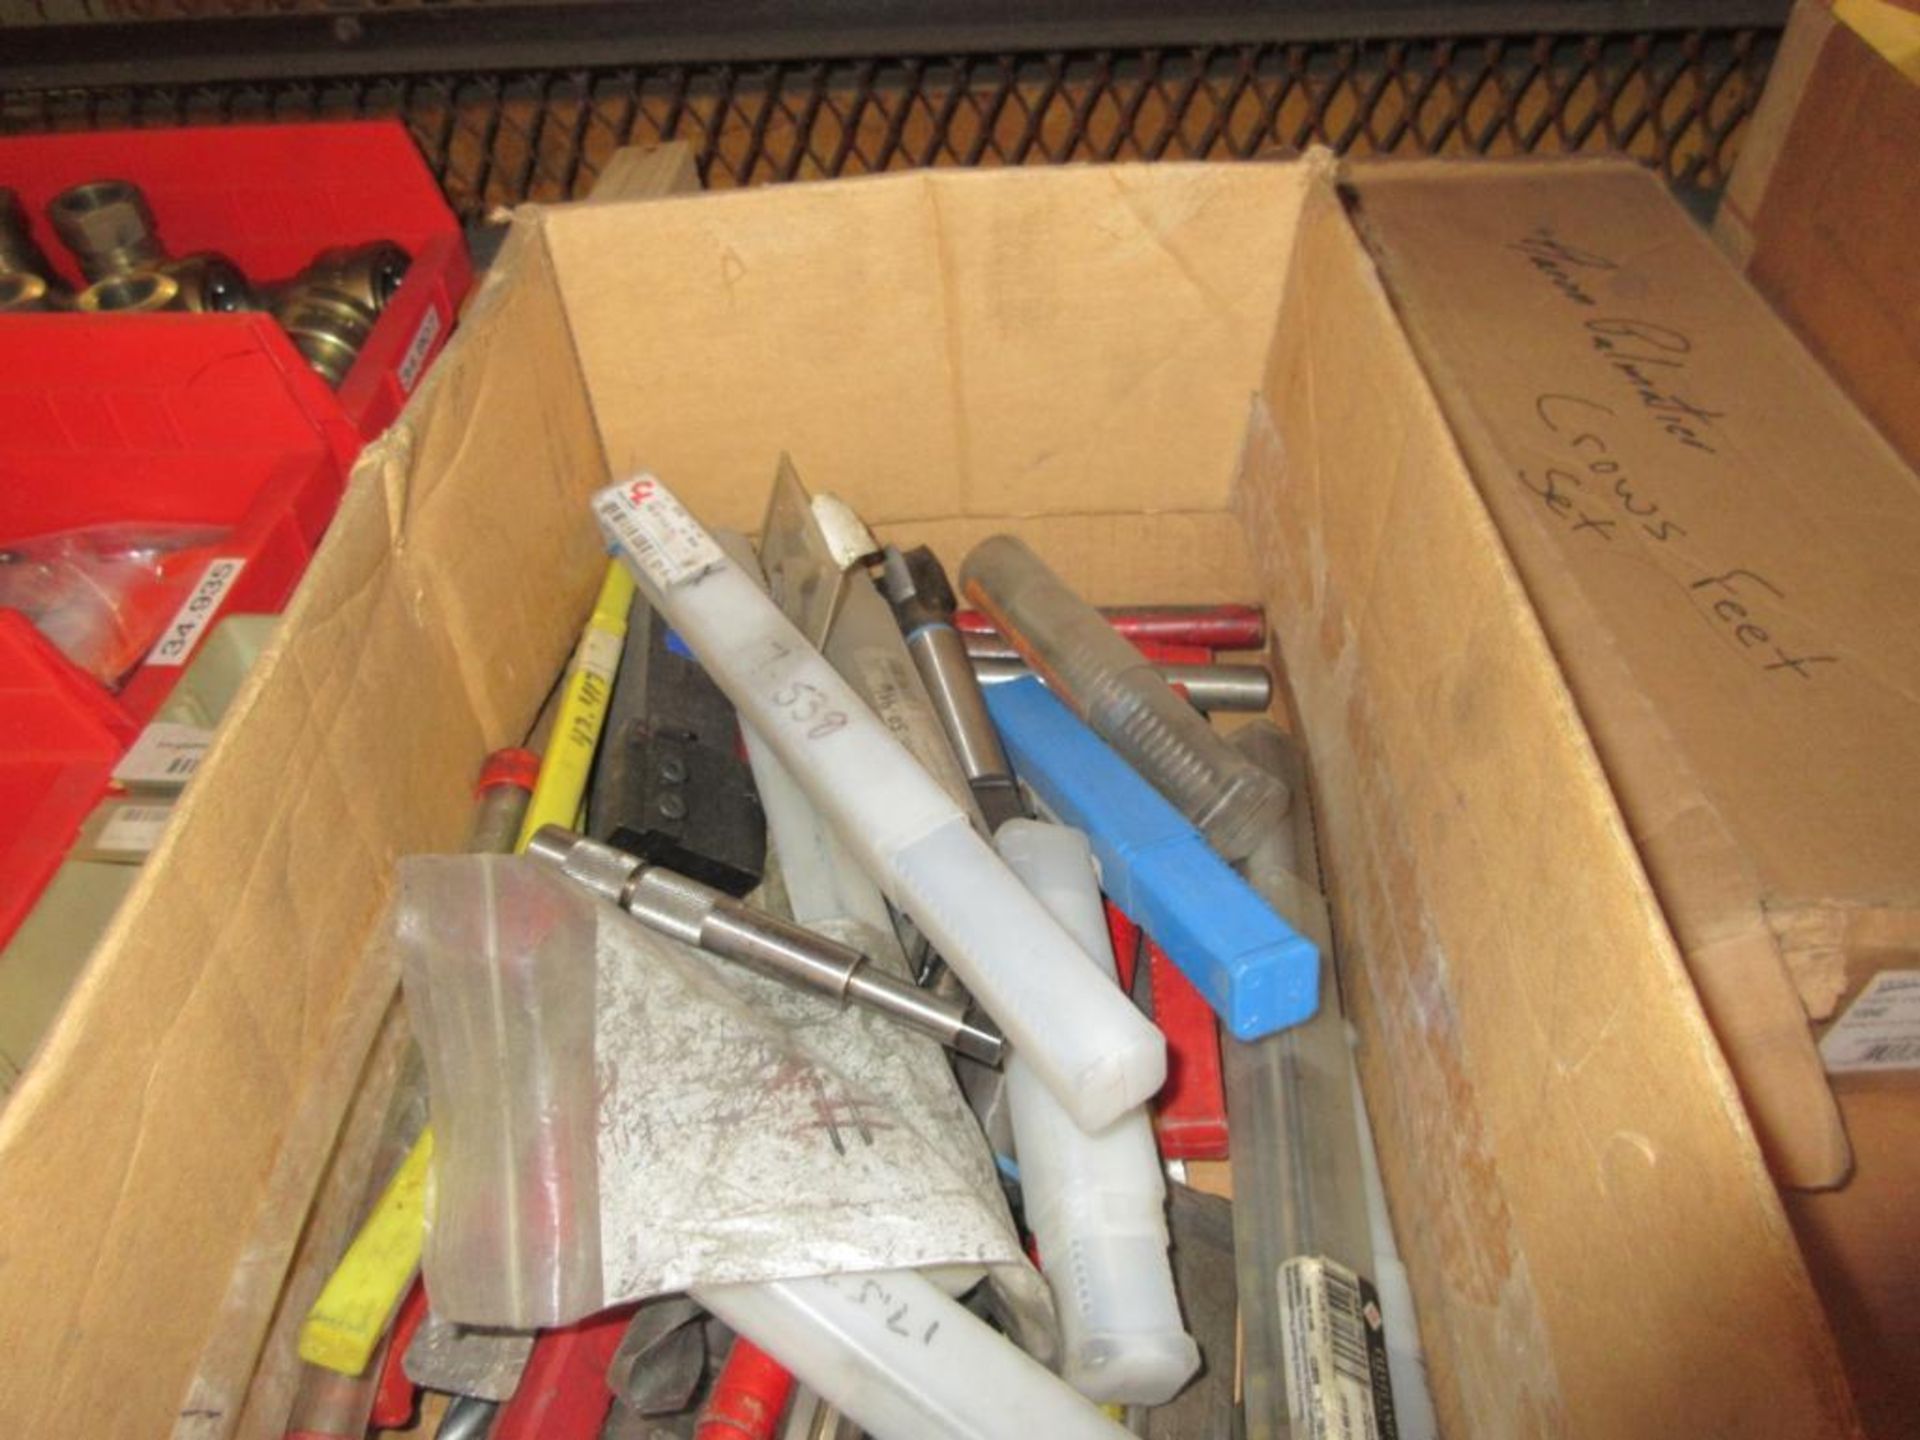 CONTENTS OF (22) SECTIONS PALLET RACK: ASSORTED ABRASIVES, SUNNEN STONES, TOOL BITS, DOVETAIL CUTTER - Image 17 of 43